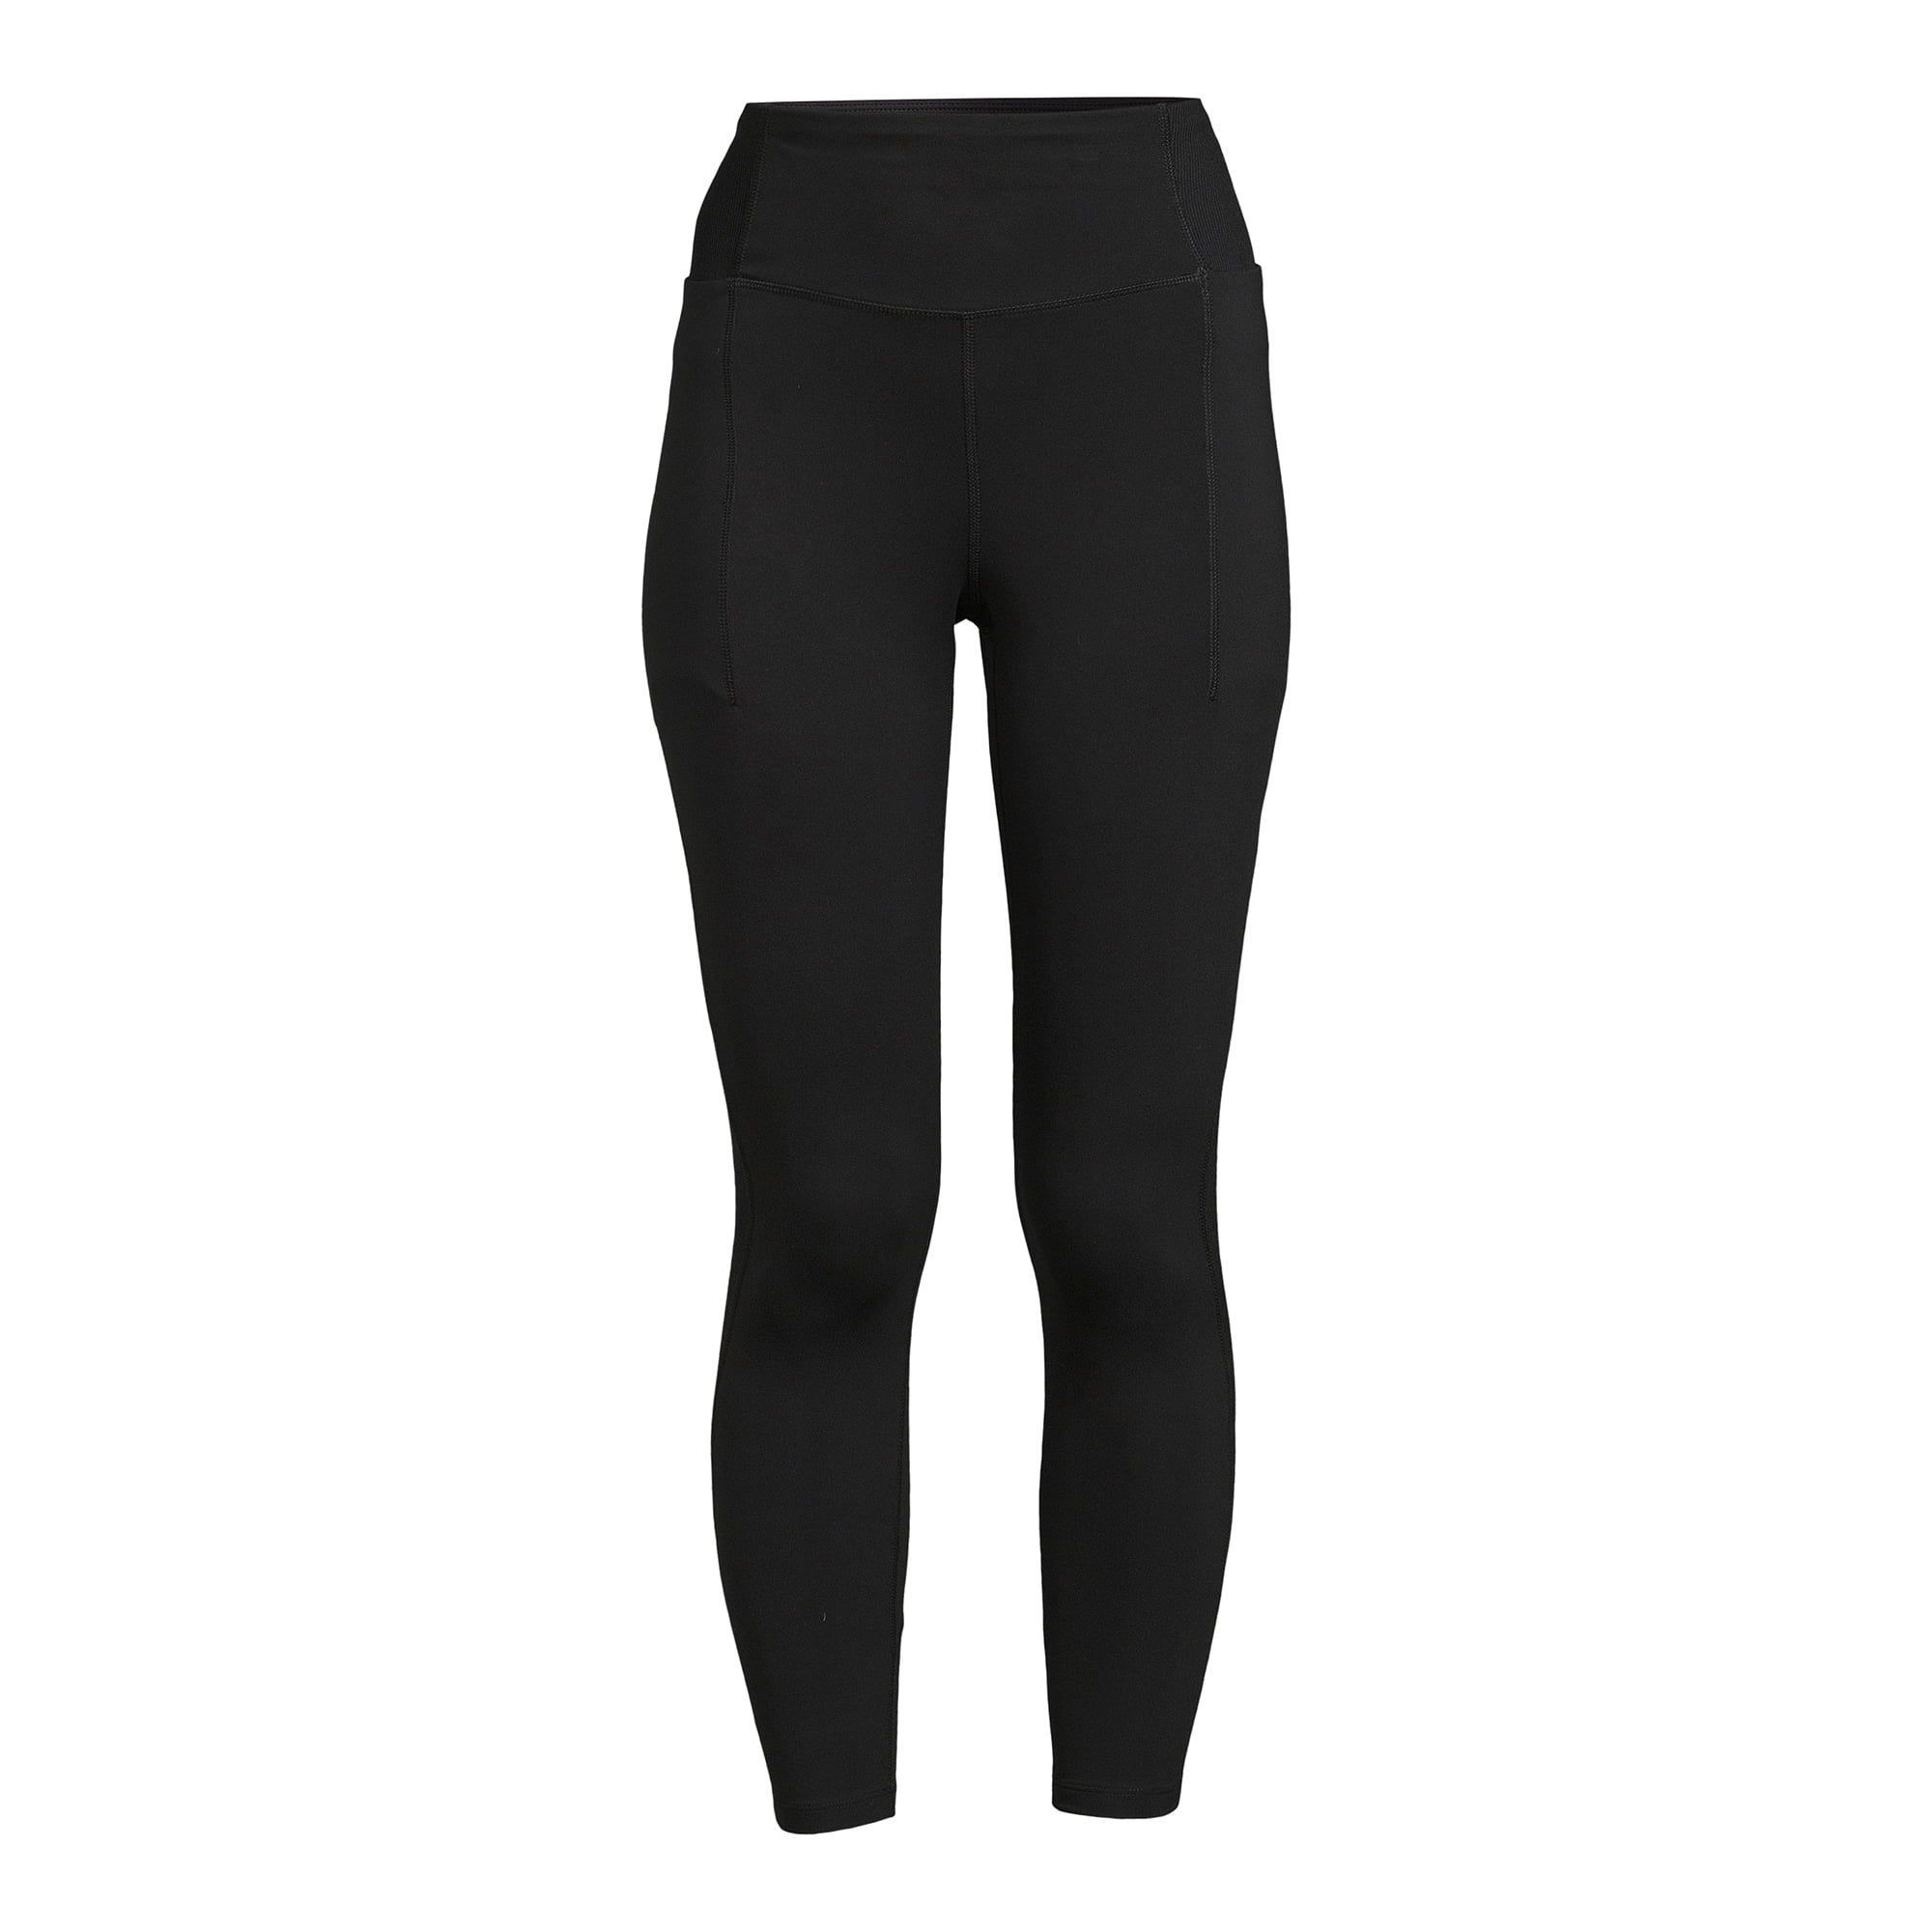 Avia Women's Performance Leggings with Ribbed Insets | Walmart (US)